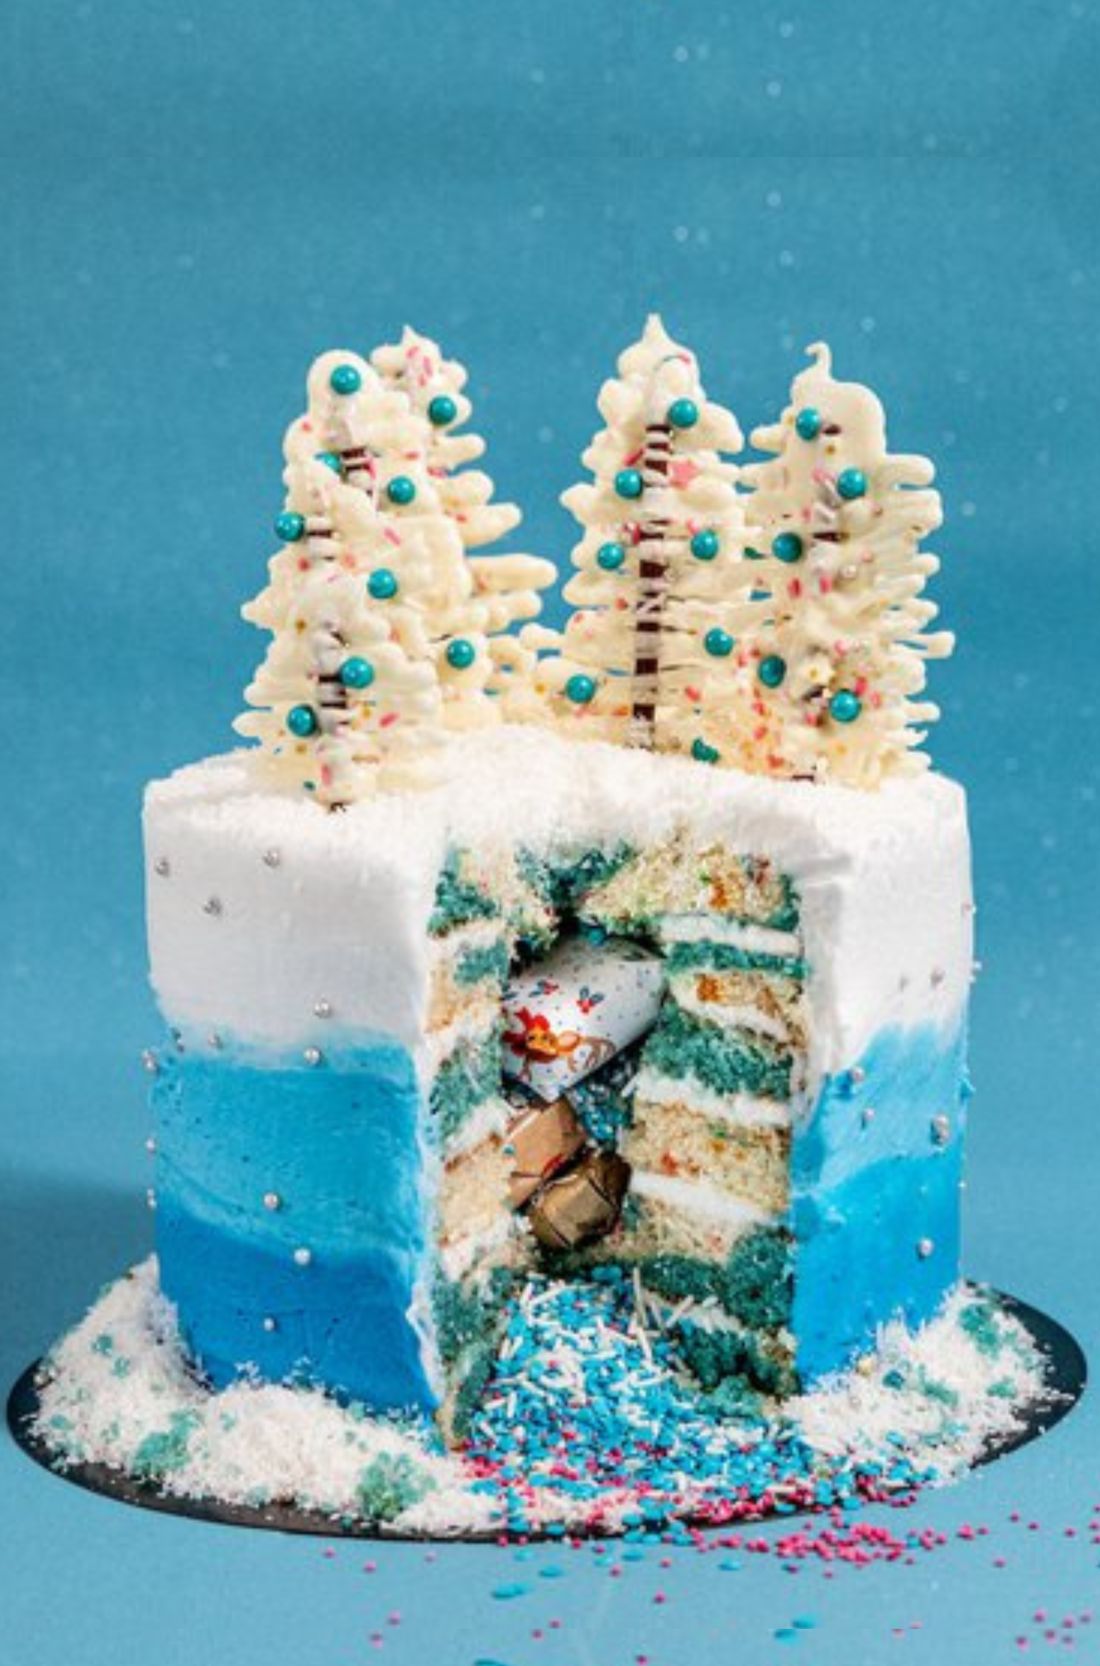 An image of a three-tiered Winter Wonderland Cake decorated with snowflakes, shimmering icing, and a festive topper.